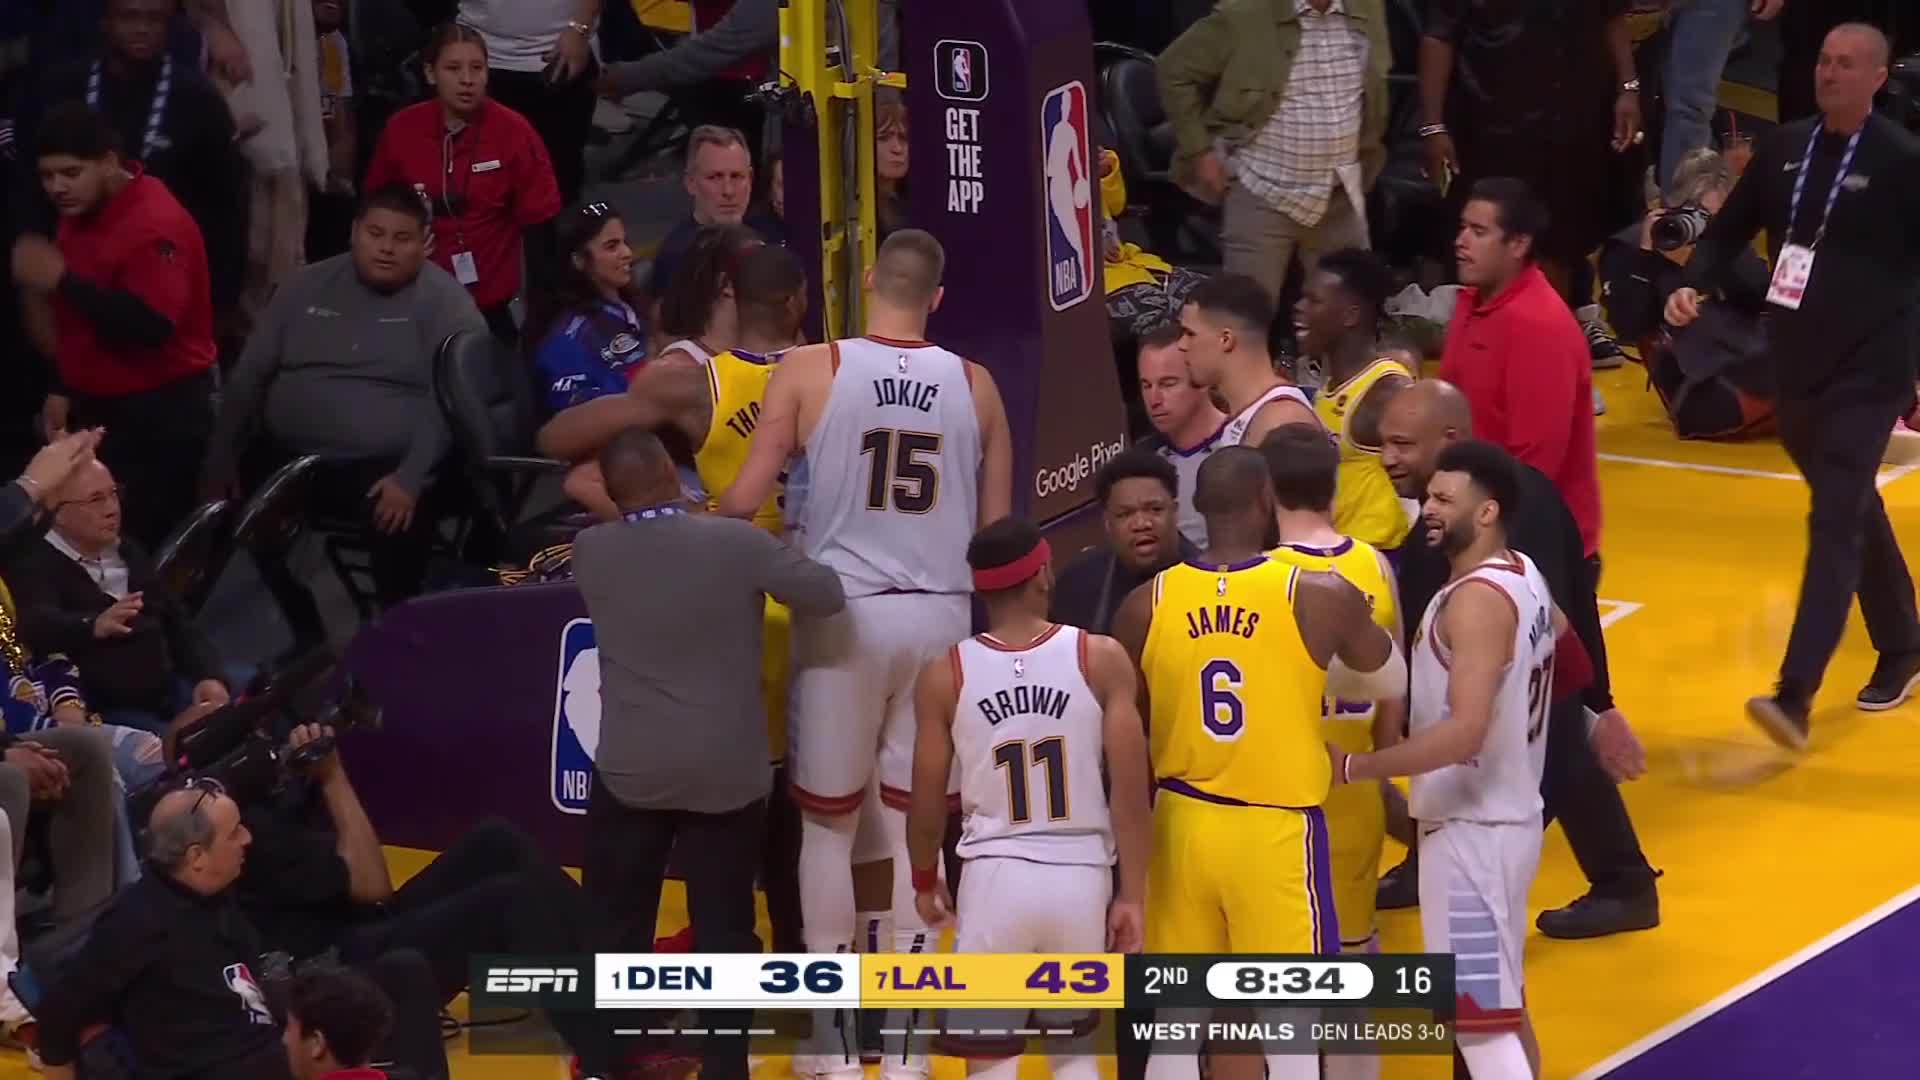 Highlight Aaron Gordon and LeBron James get into a scuffle and have to be separated; both get a tech